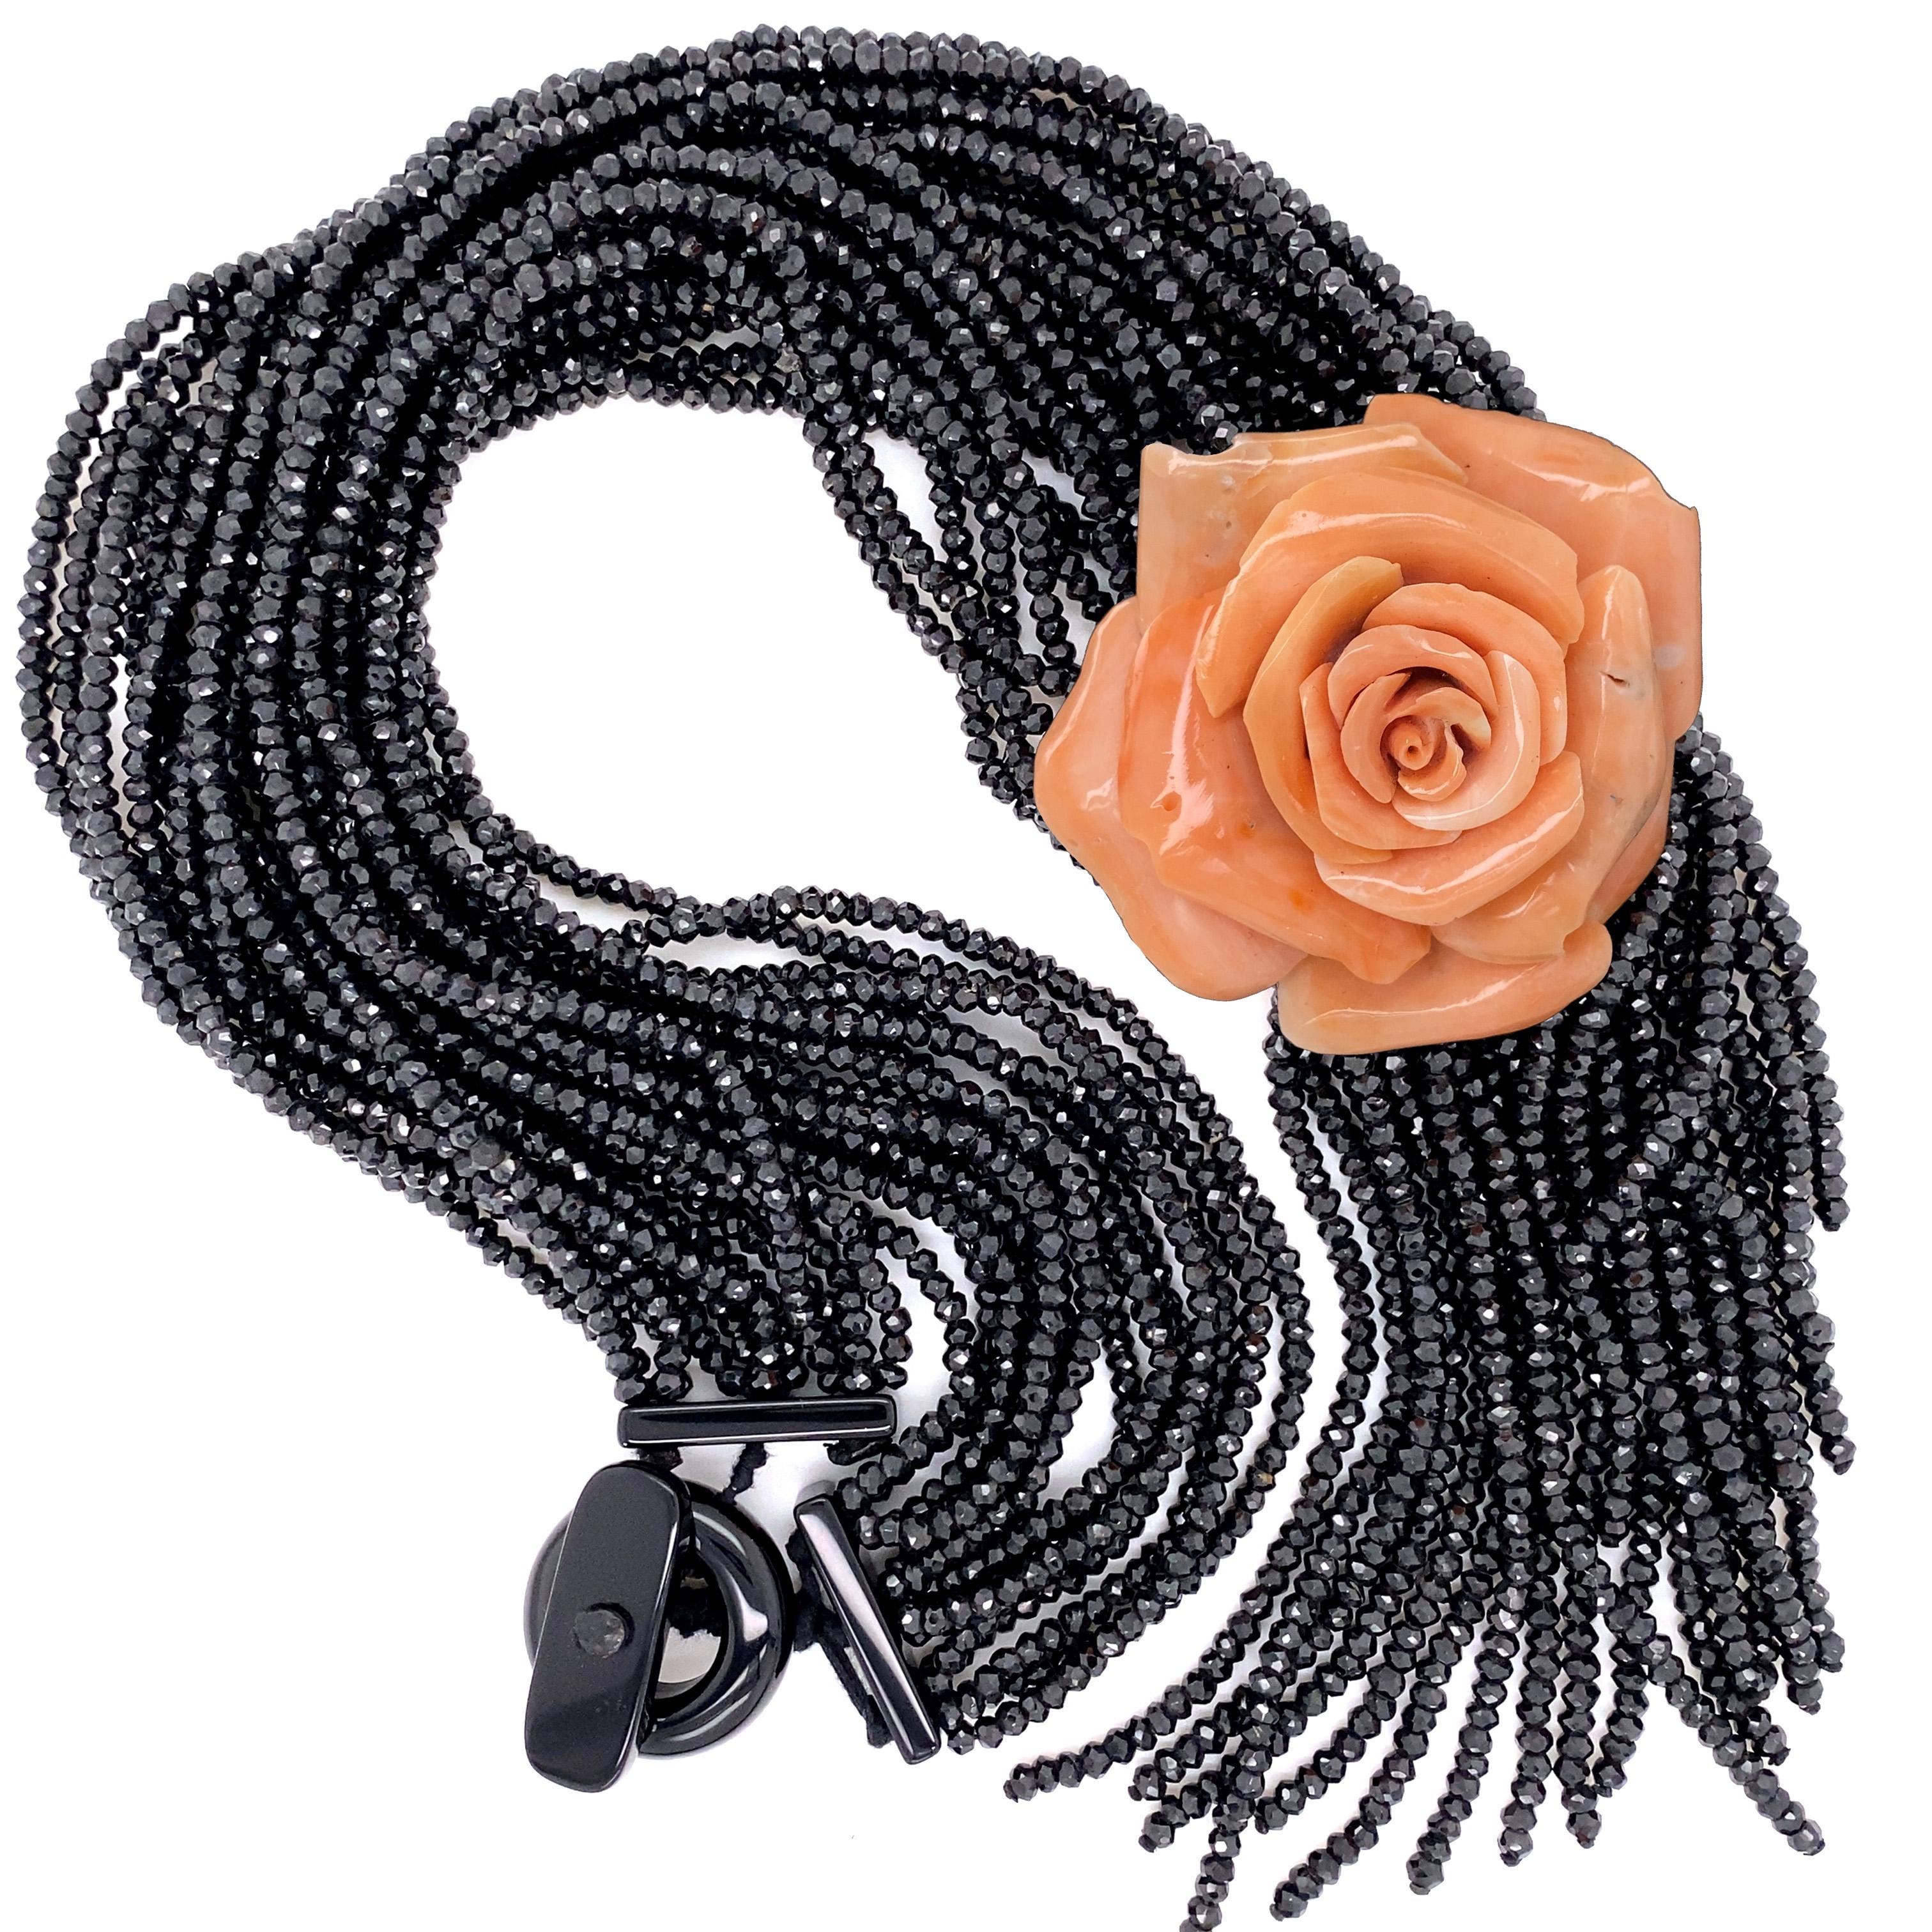 Simply Beautiful! Stylish Rare Designer Rosita Petrosino Couture Multi-Strand Necklace, featuring Black Spinel Beads, weighing approx. 700 Carat, a 125 Carat Carved Coral Rose.  Approx. length of necklace: 20”. Unique and fabulous as you are! A